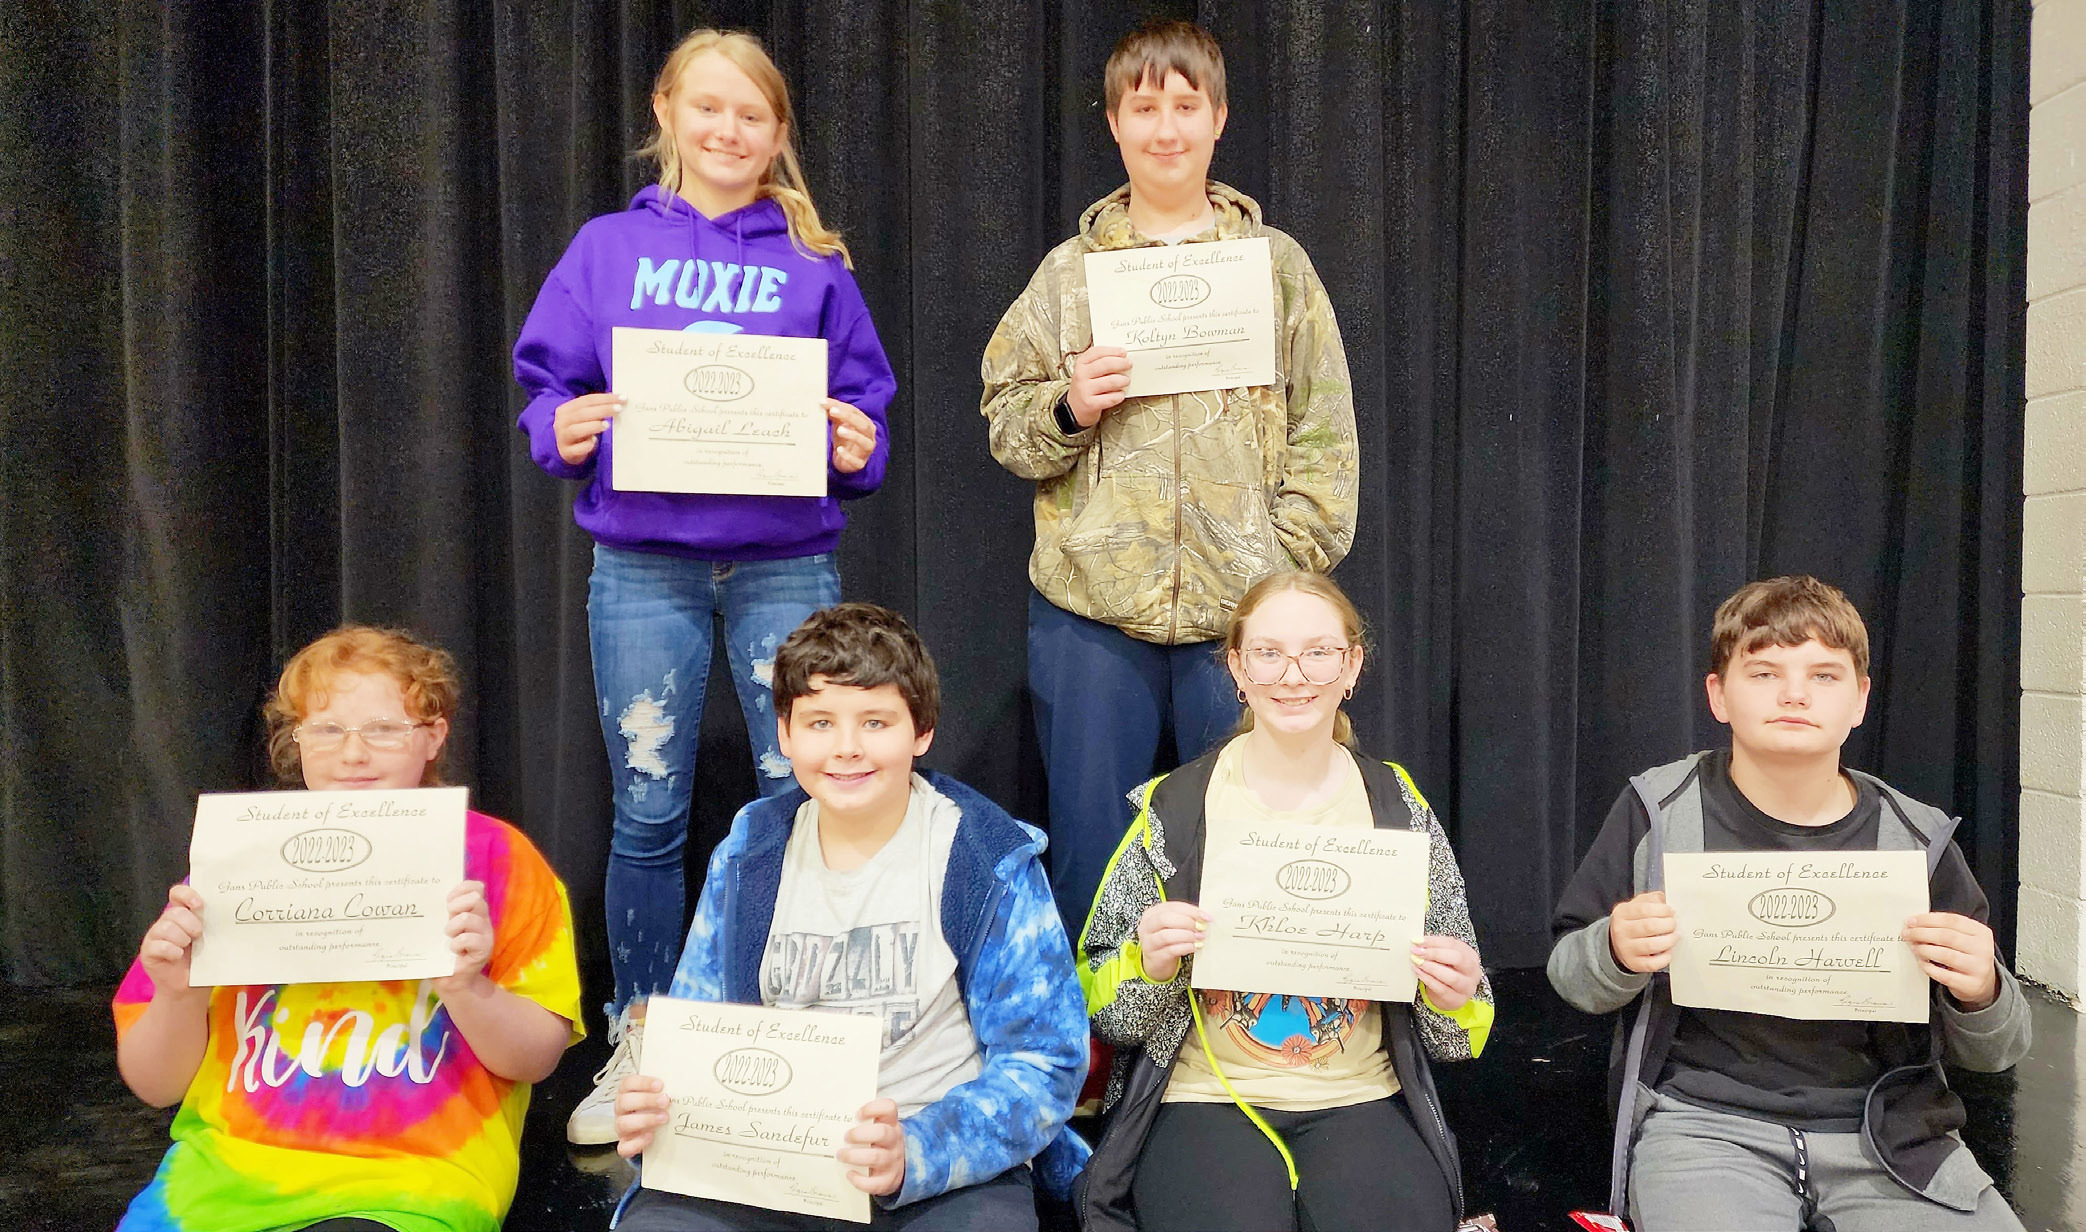 Gans Middle School Front row, Corrina Cowen, James Sandefur, Khloe Harp and Lincoln Harvell. Back row, Abigail Leach and Koltyn Bowman. Not Pictured, Amarys White and Preston Bennett.